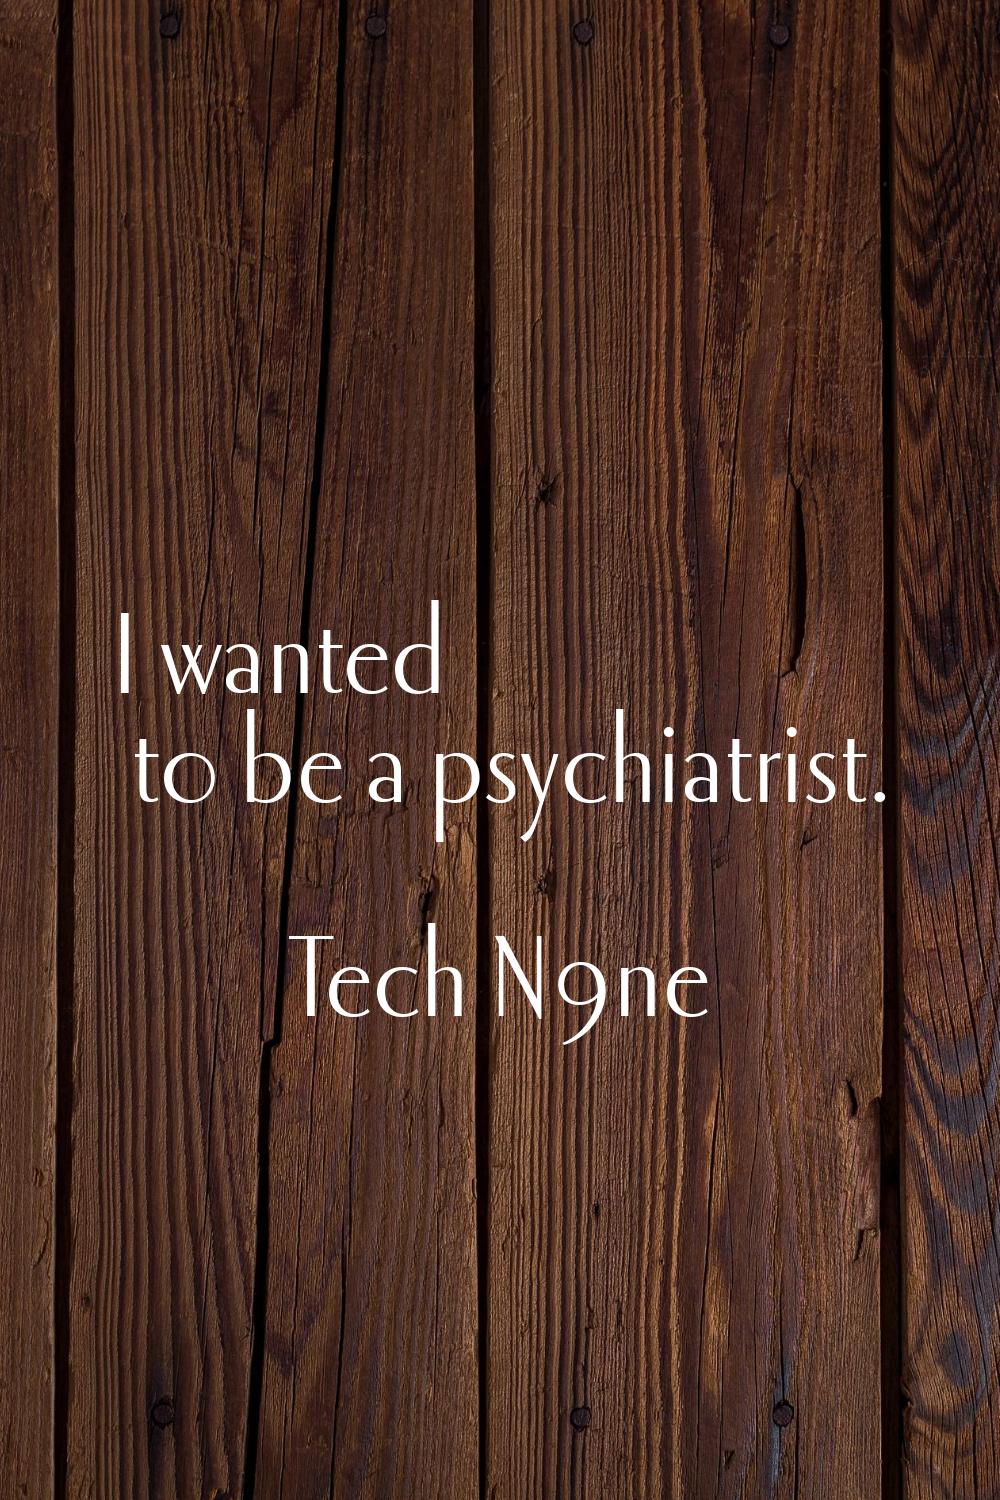 I wanted to be a psychiatrist.